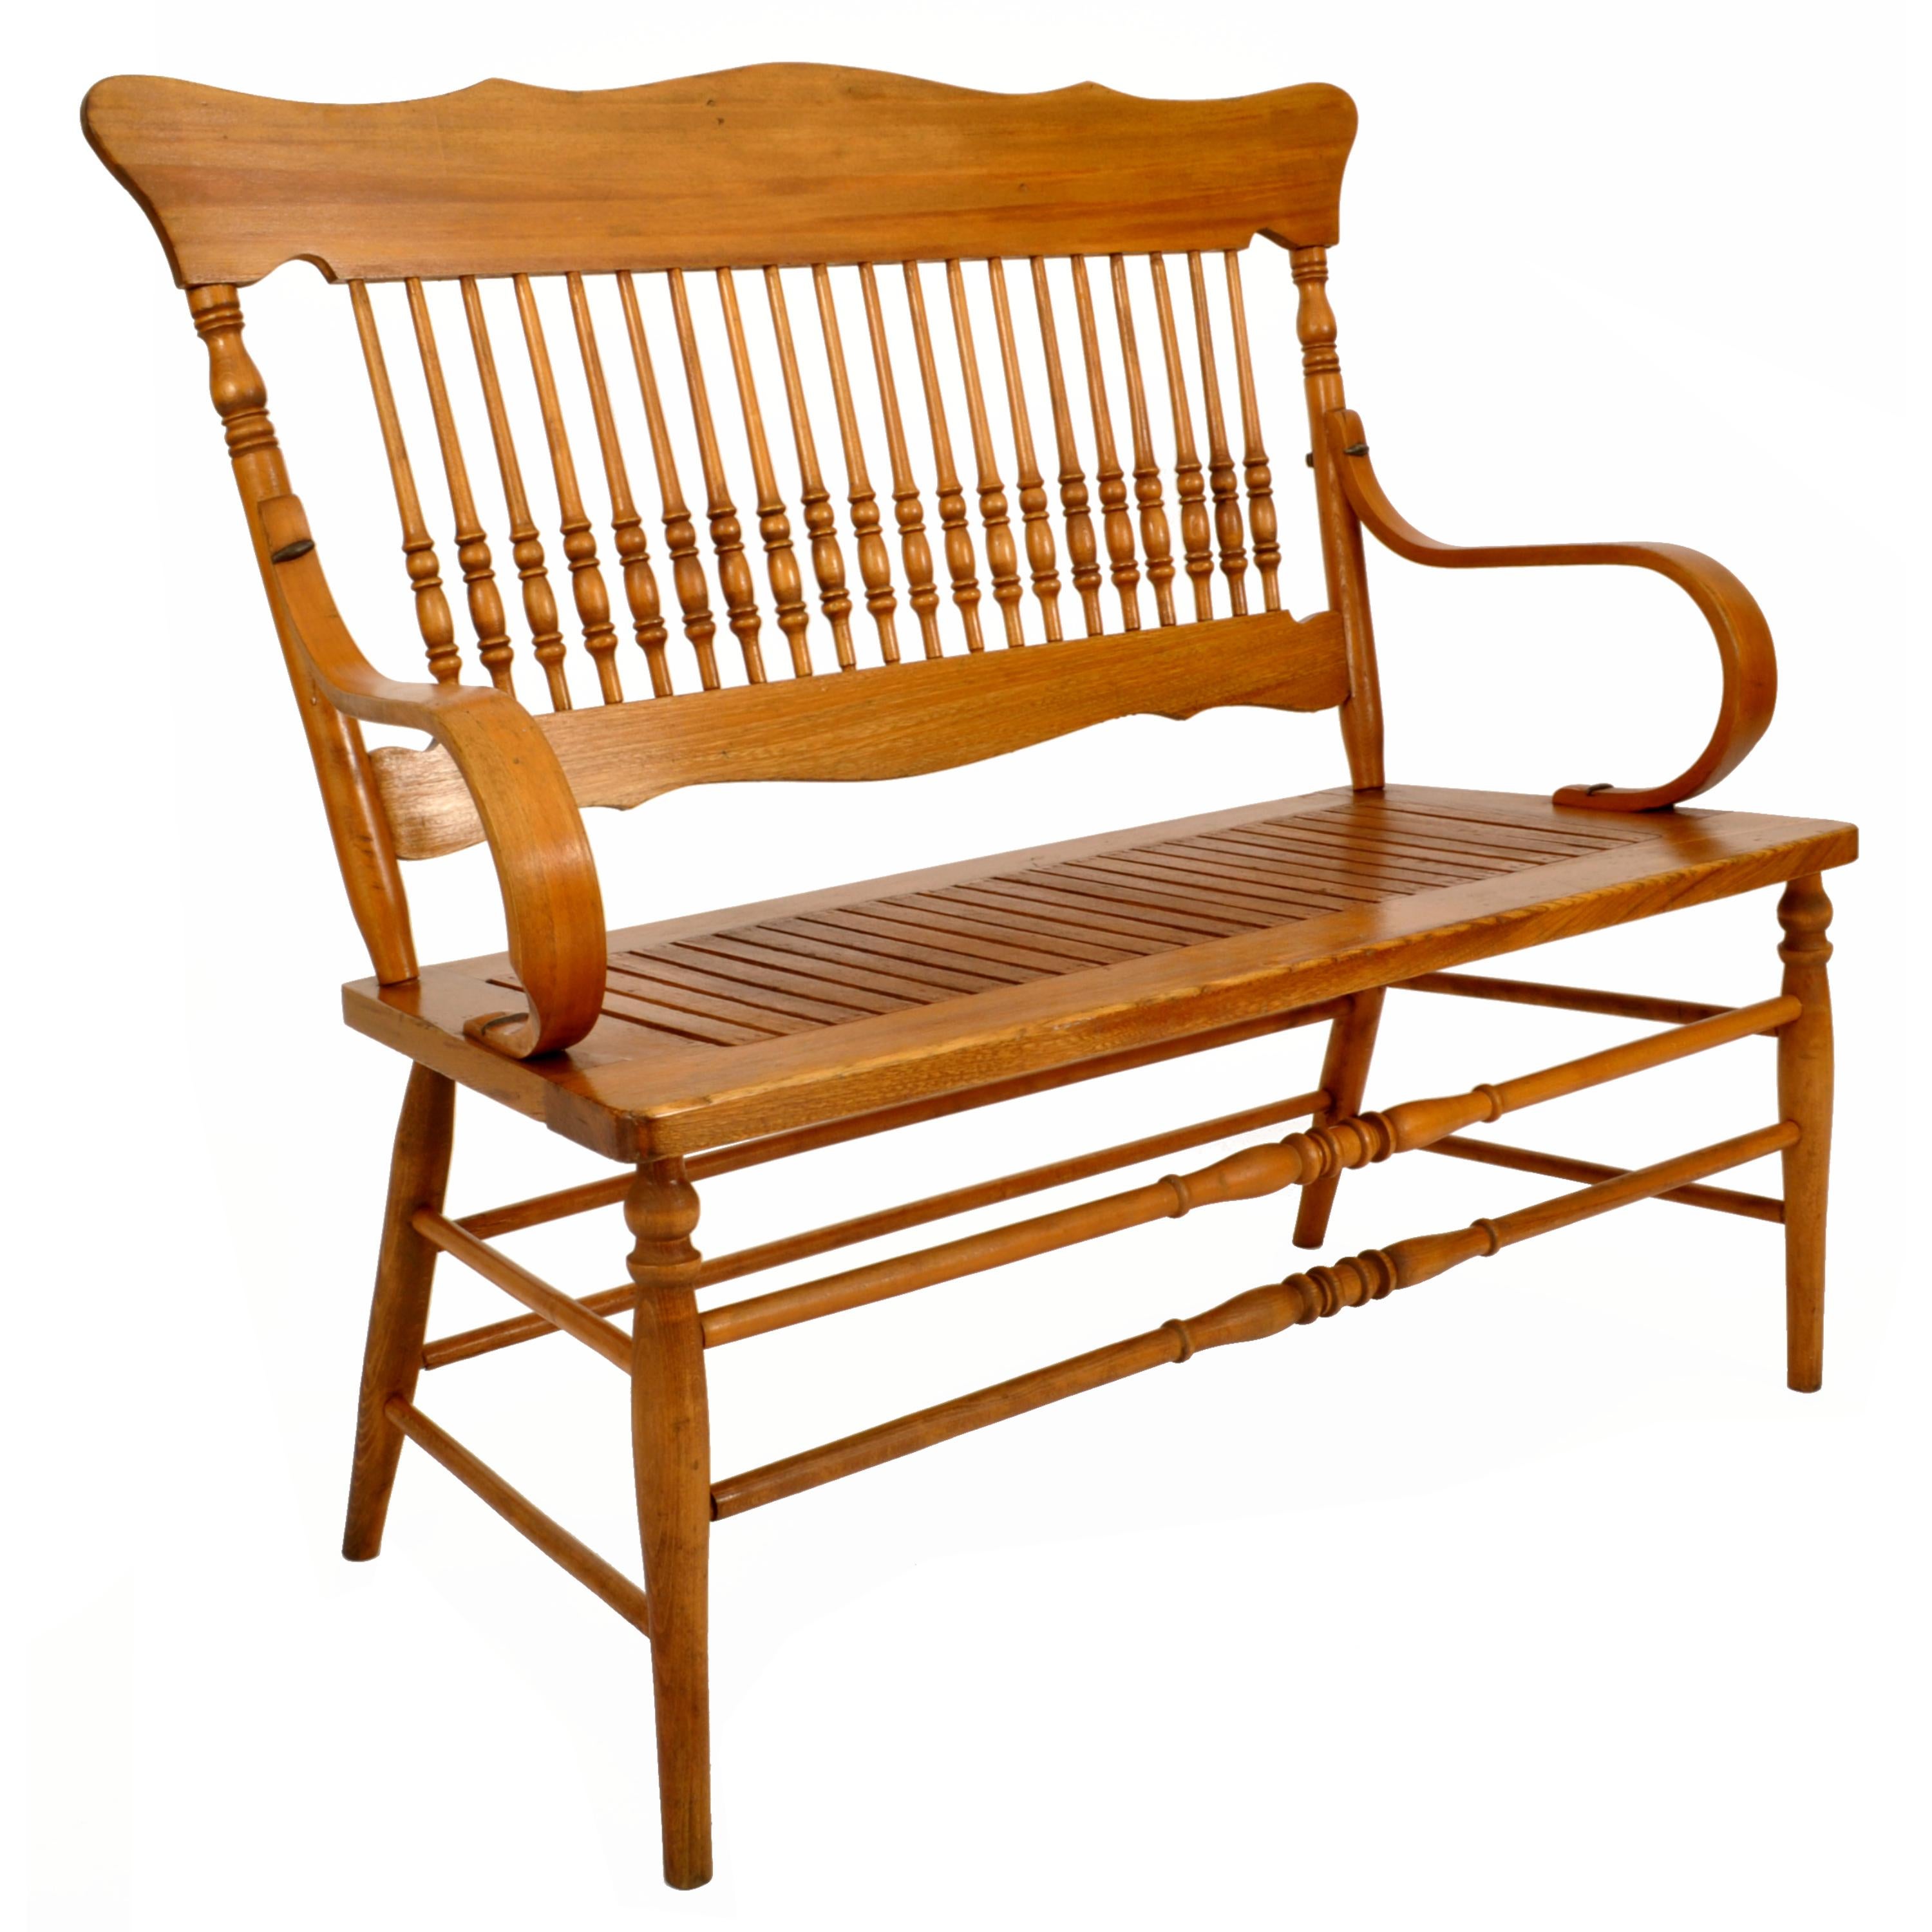 A very good antique American Colonial New England spindled & bentwood deacon's bench, circa 1880.
The bench of unusual diminutive size (will comfortably seat at least two adults) and having a shaped crest back with turned spindles below, a pair of